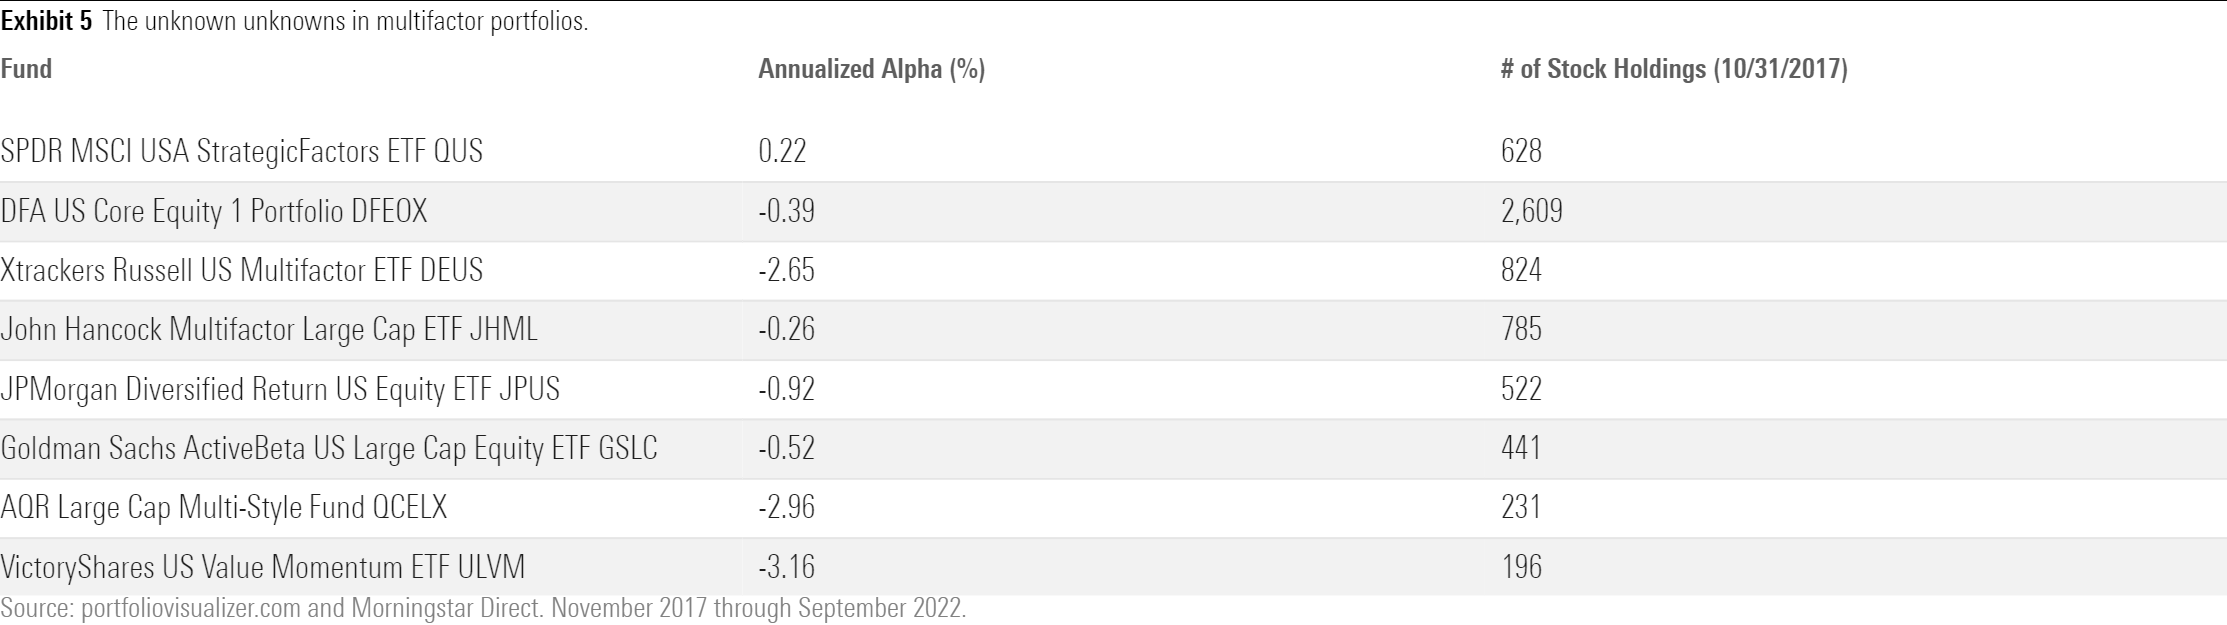 Funds with lower alphas usually offer better diversification.